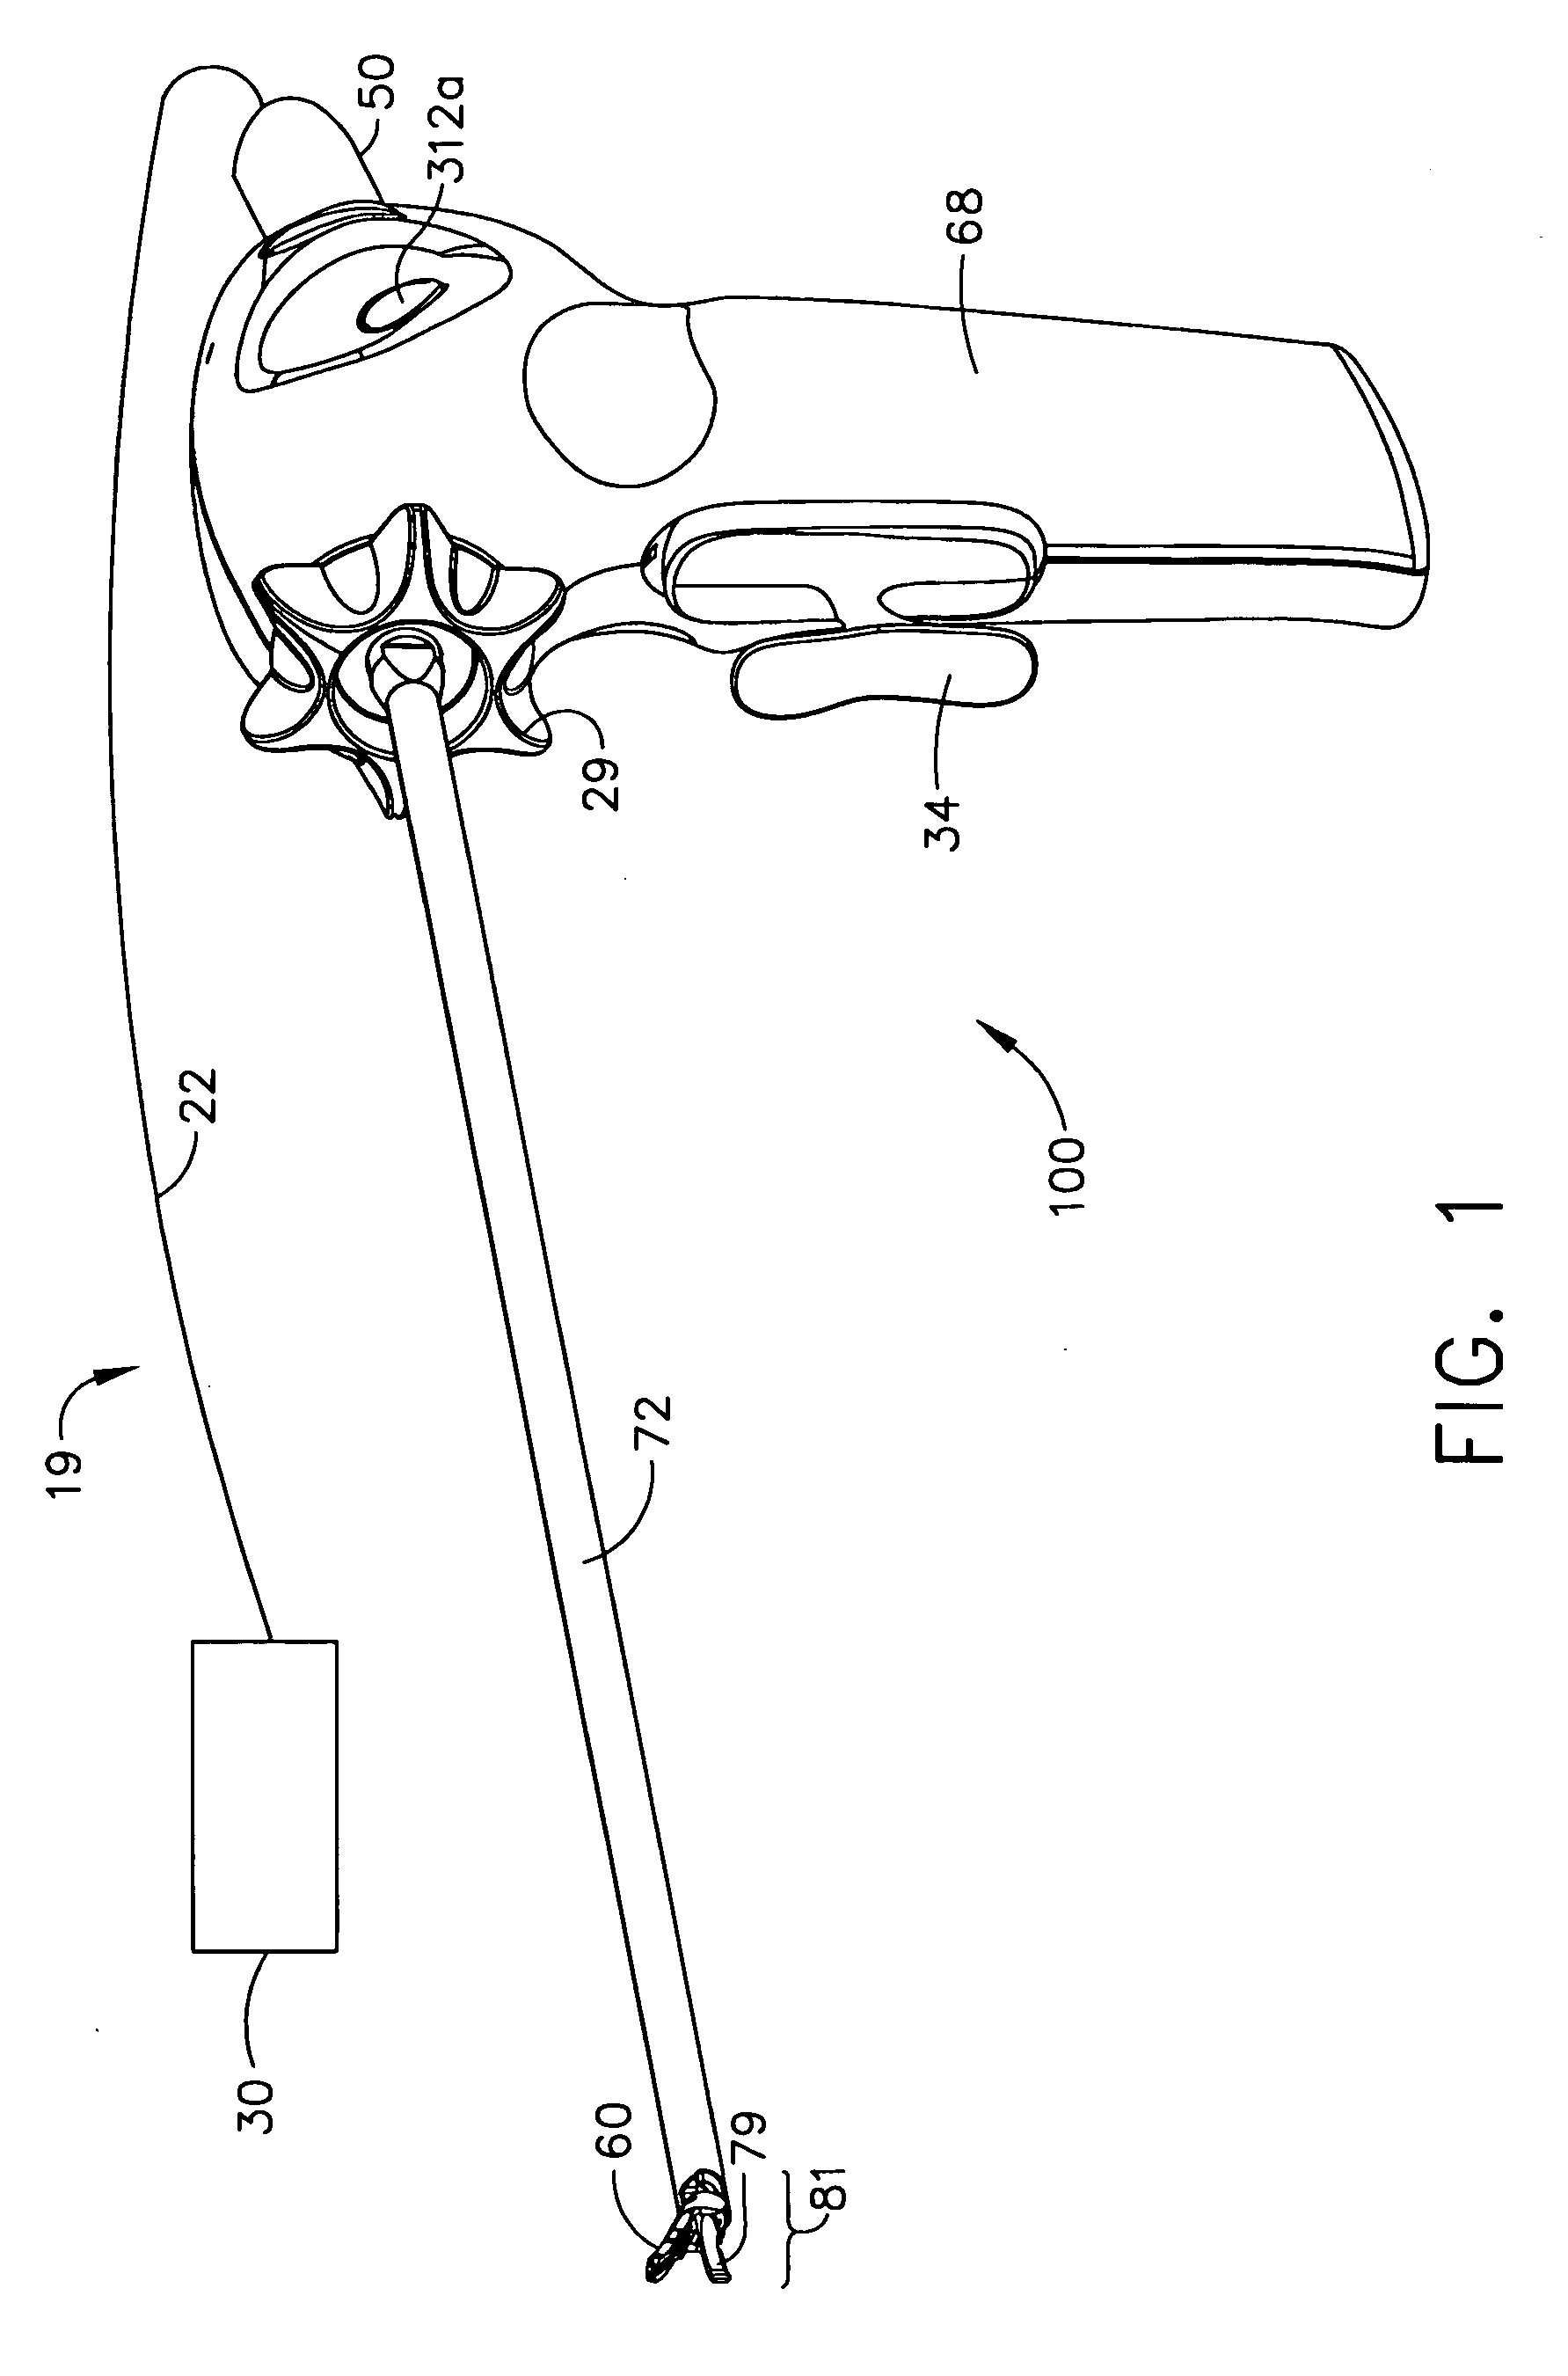 Handle assembly having hand activation for use with an ultrasonic surgical instrument